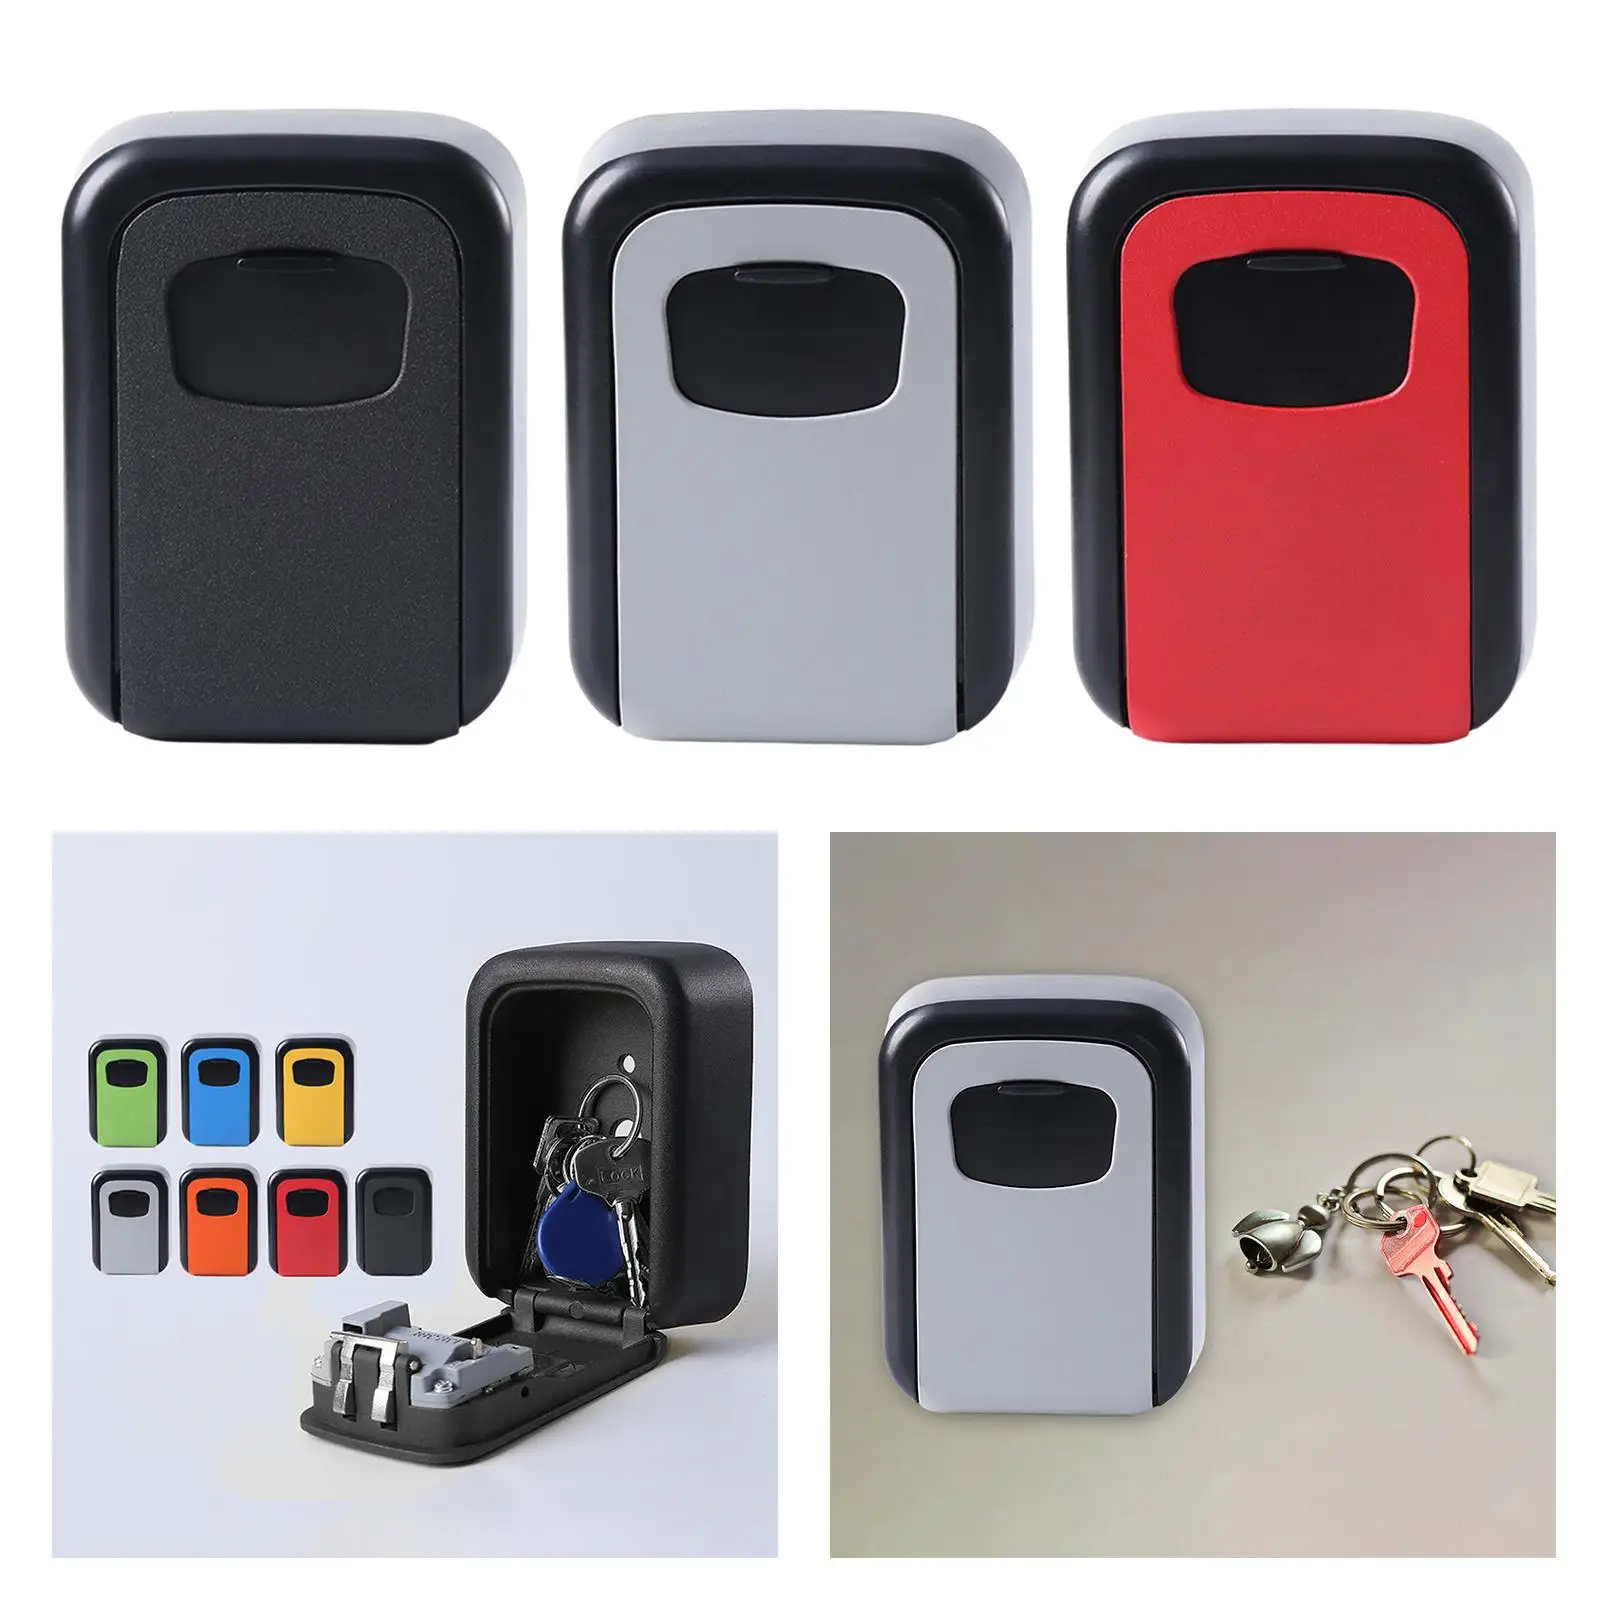 Key Cabinet Organizer with Resettable Codes Key Lock Box Security Lockbox Password Key Case for Outside Home Office Valets Car